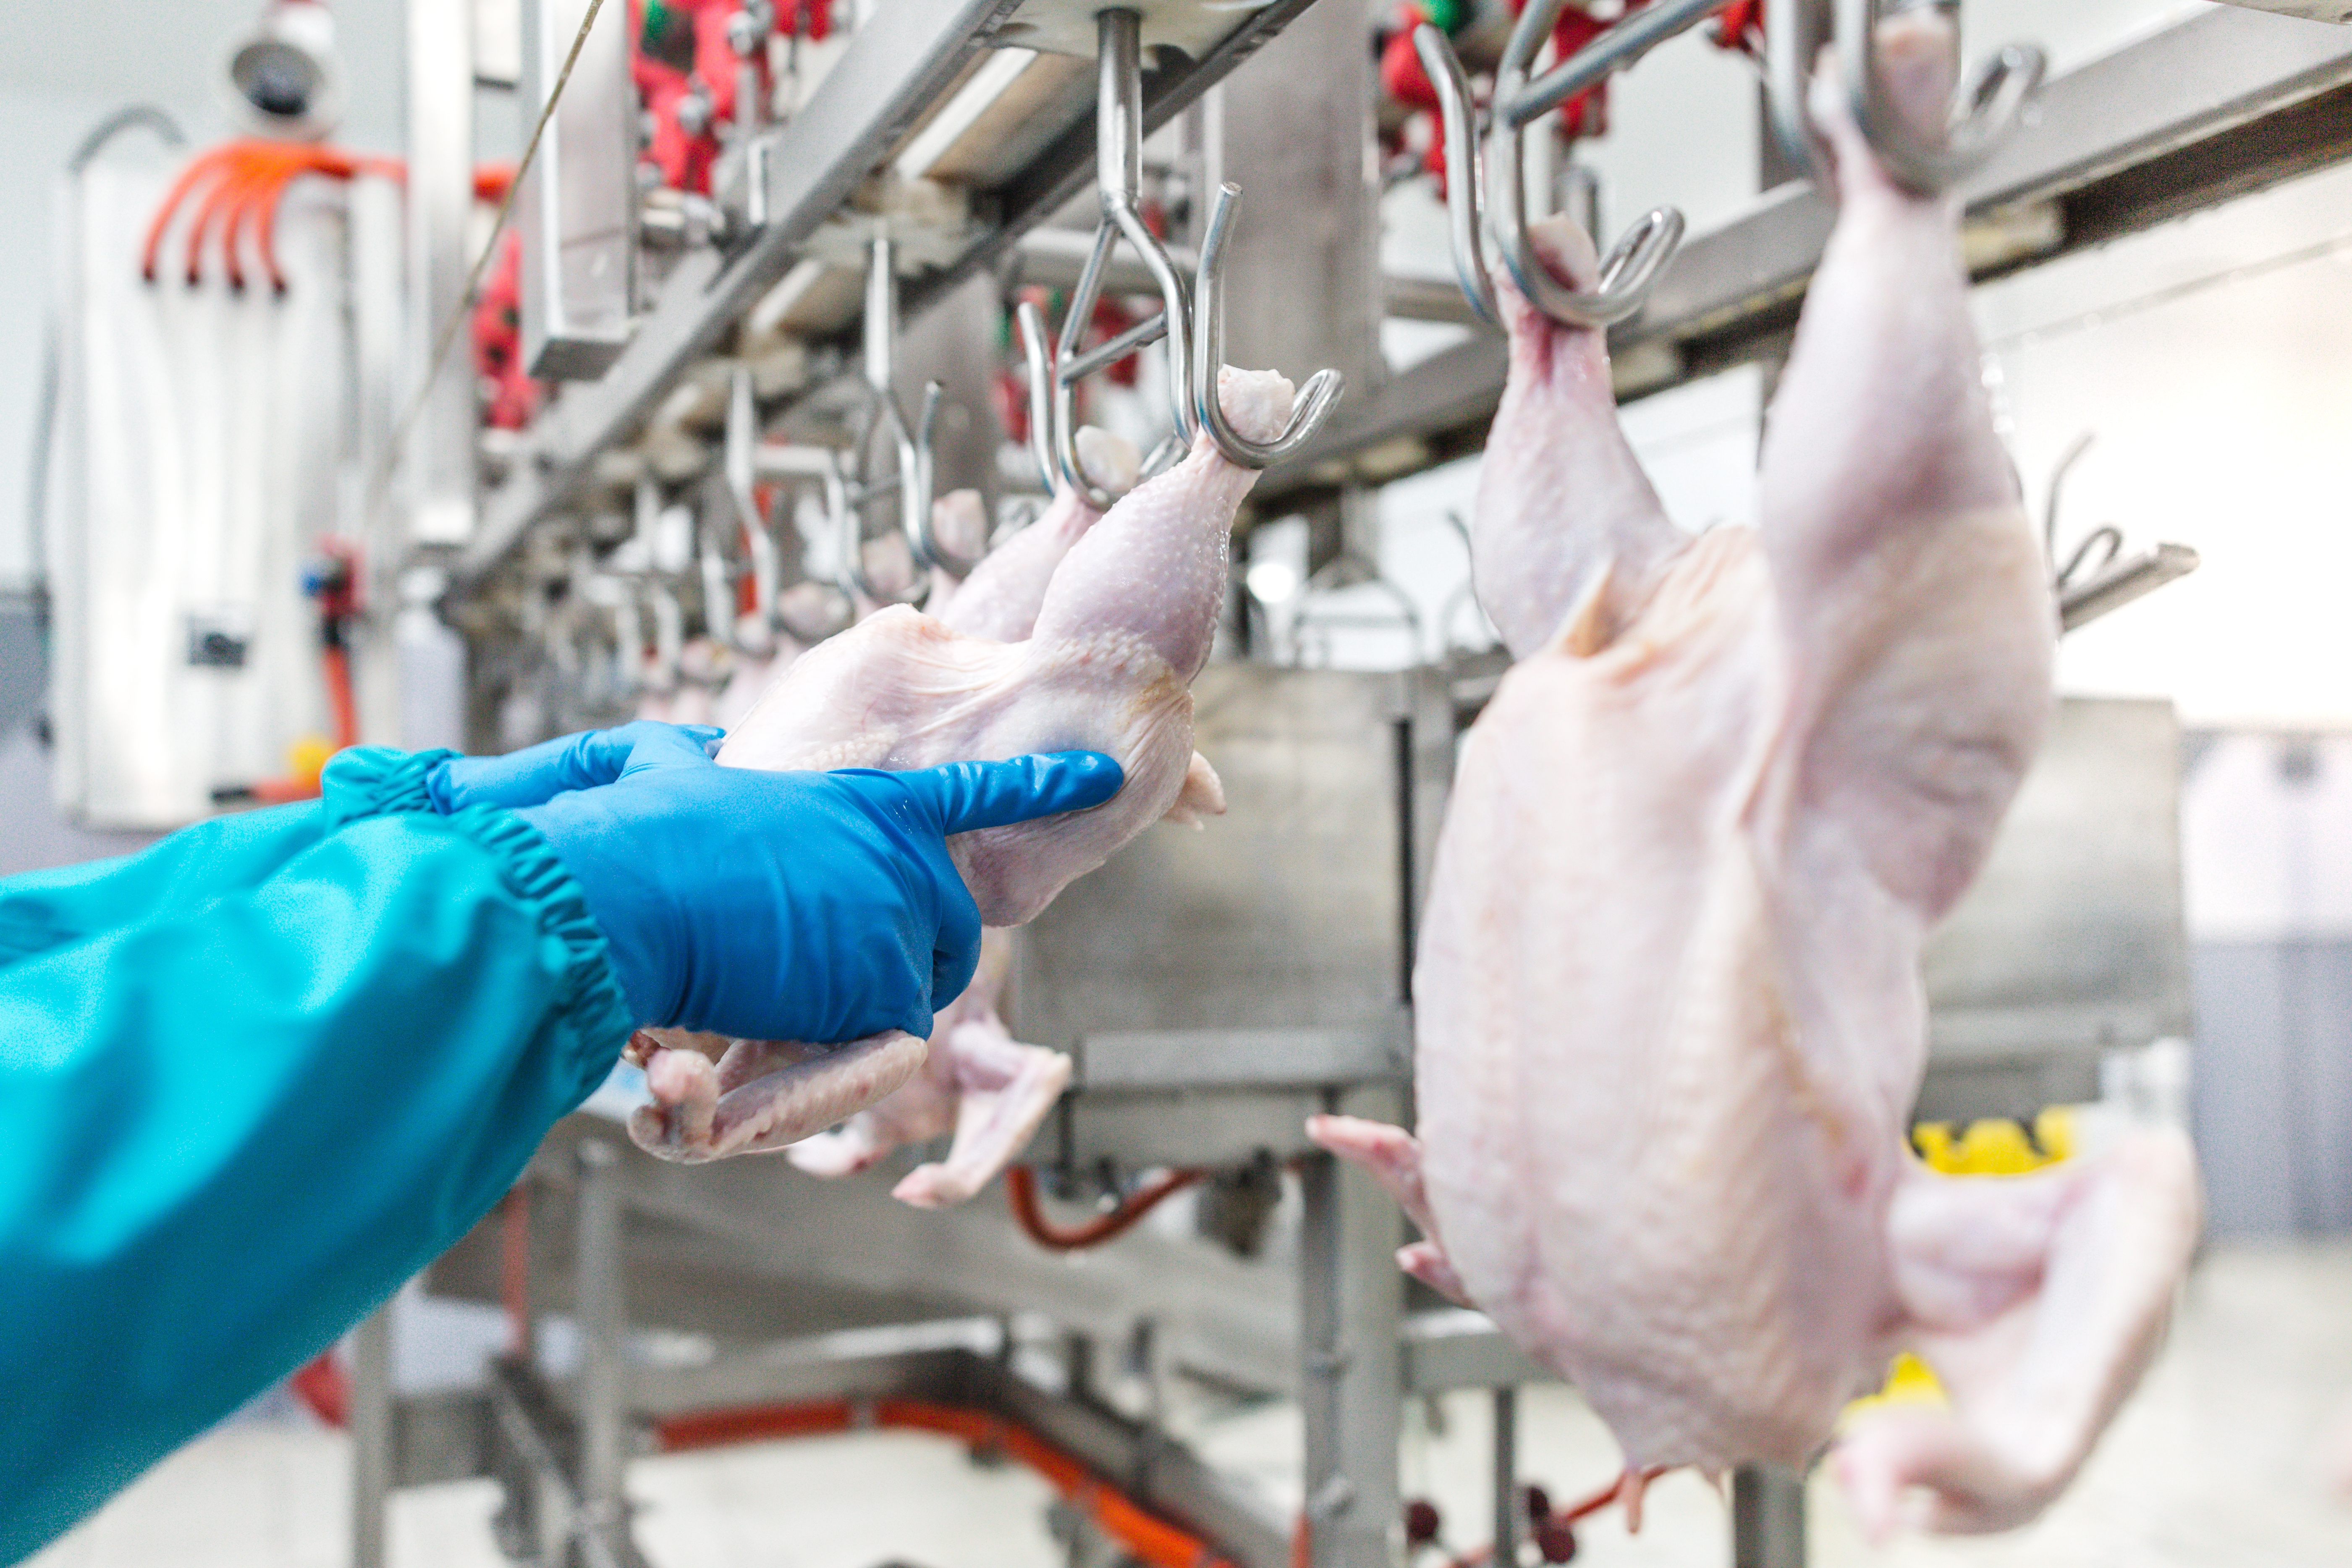 Nash in Poultry Processing